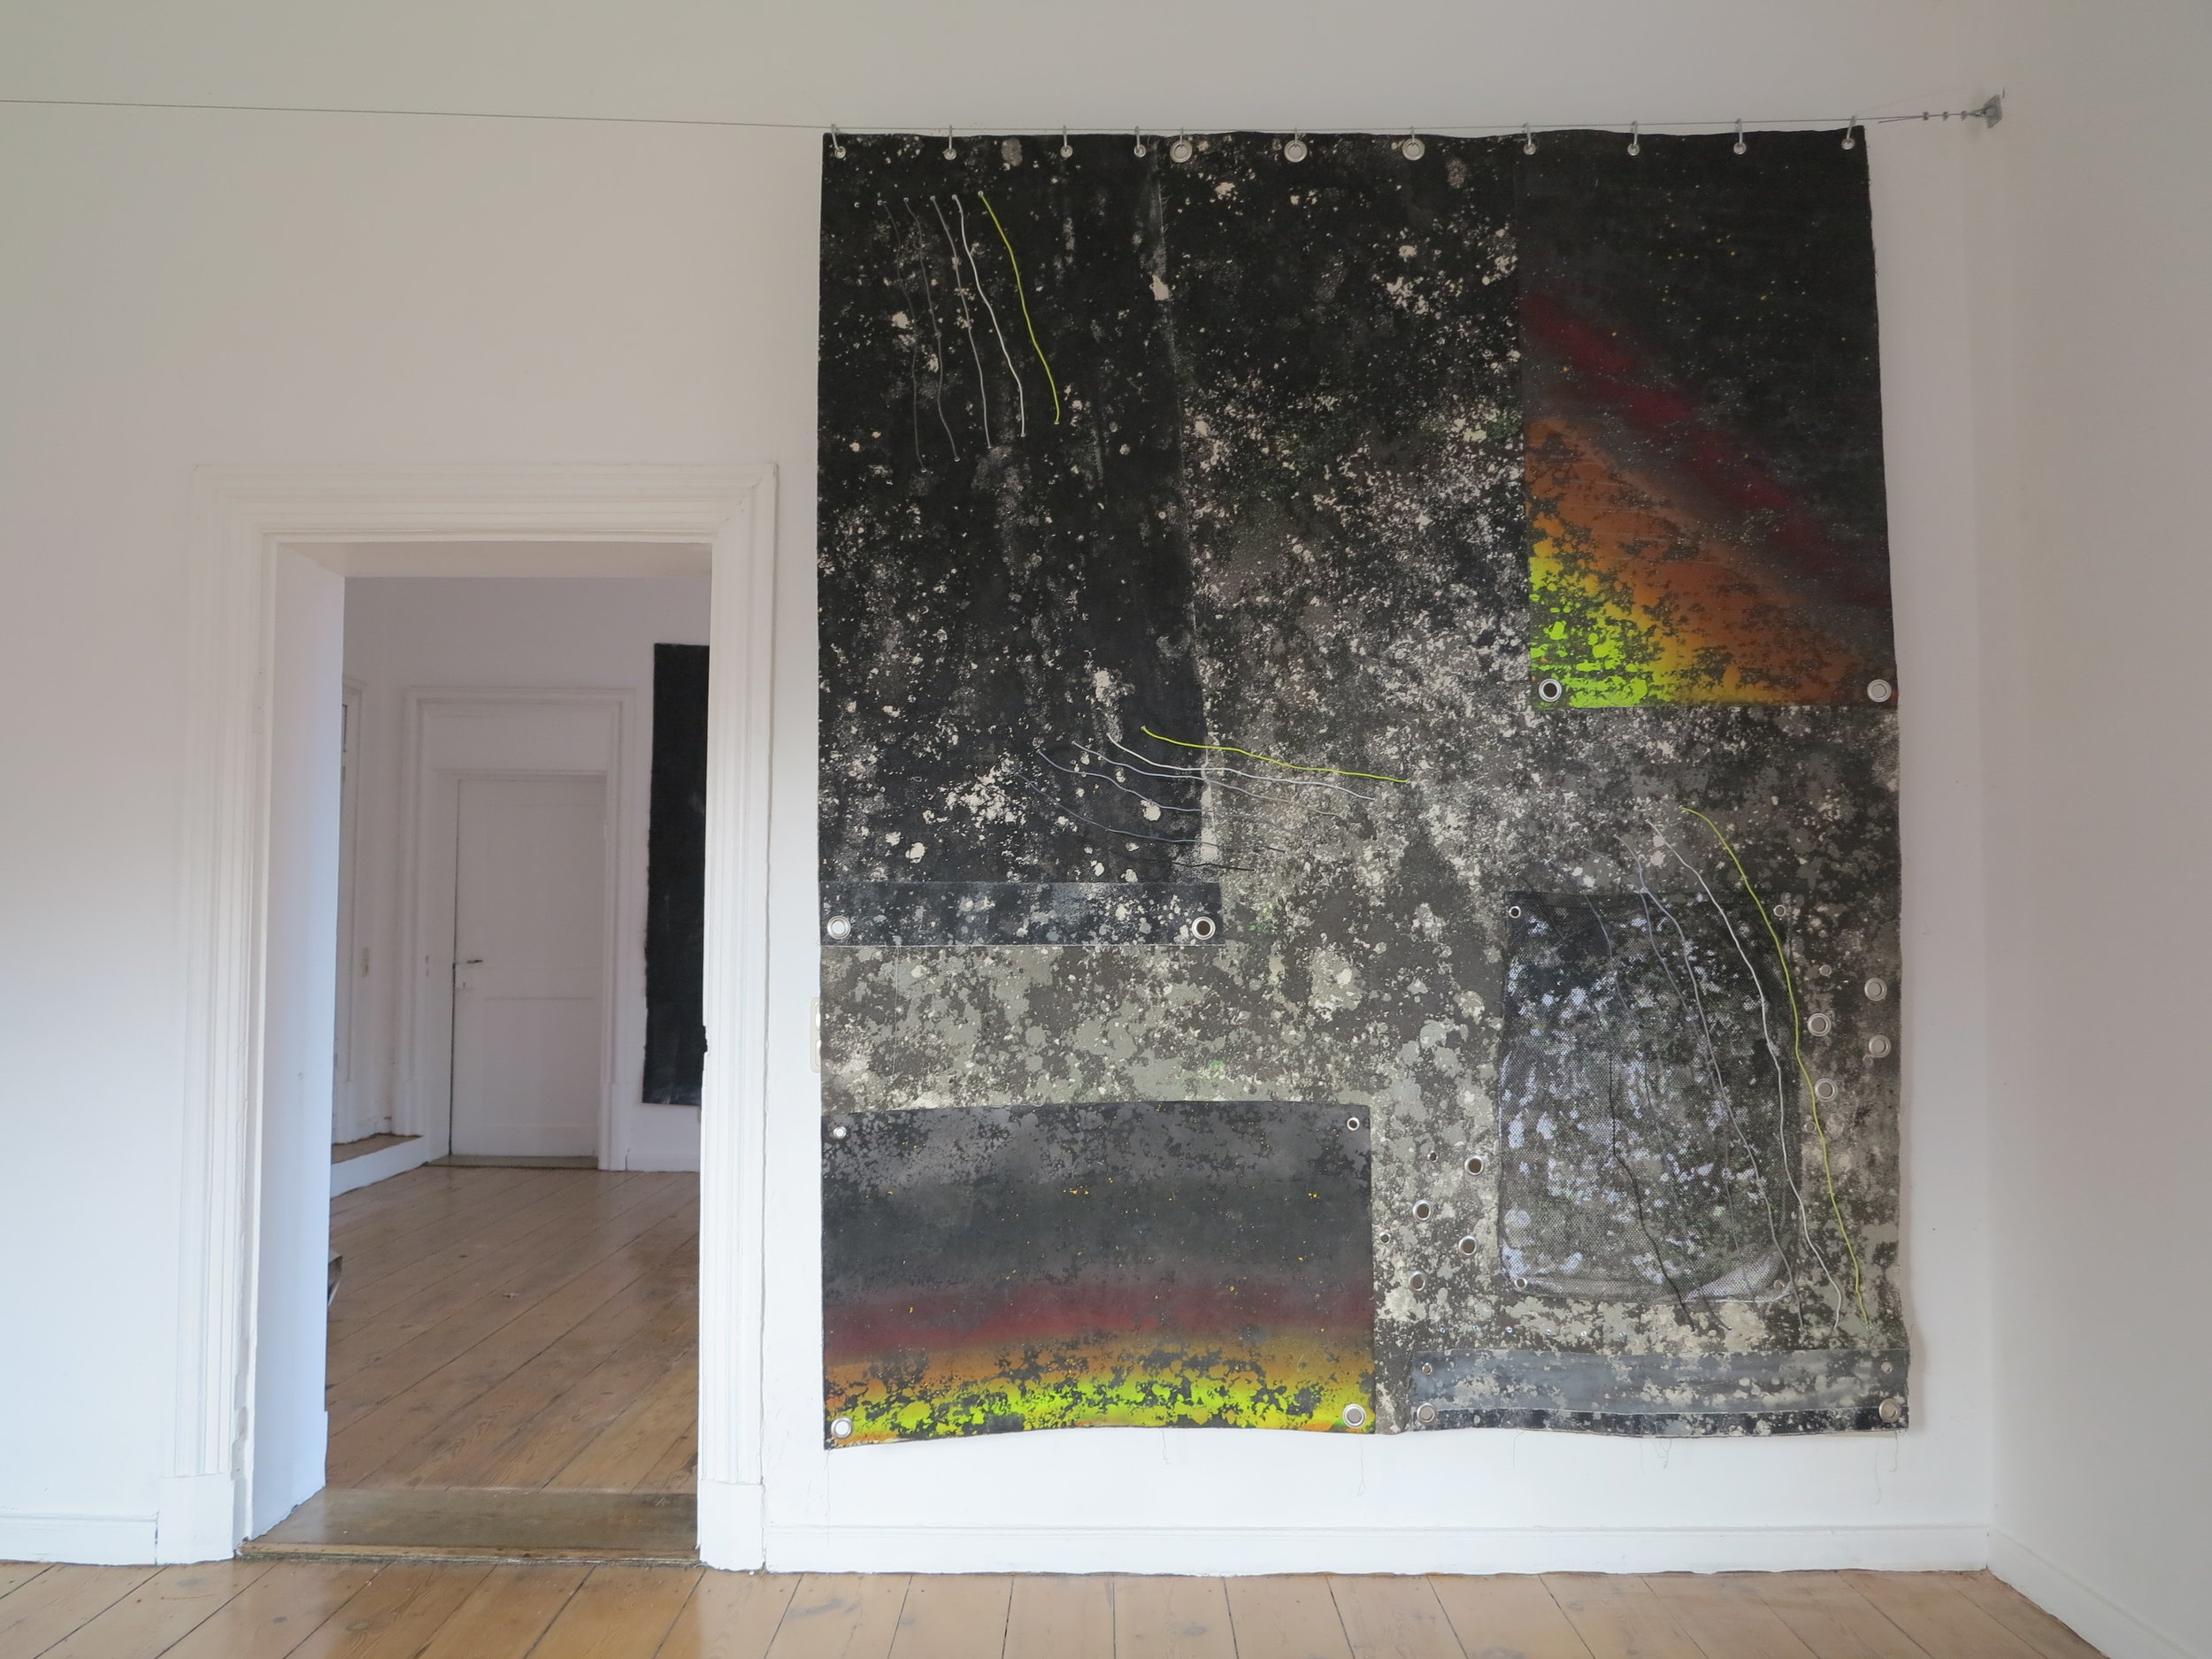  Haunted.  Alkyd resin, acrylic, sand, copper, rubber, polyester and canvas.  254 x 211 cm.  Lab Kalkhost, Kalkhorst, Germany, 2019. 